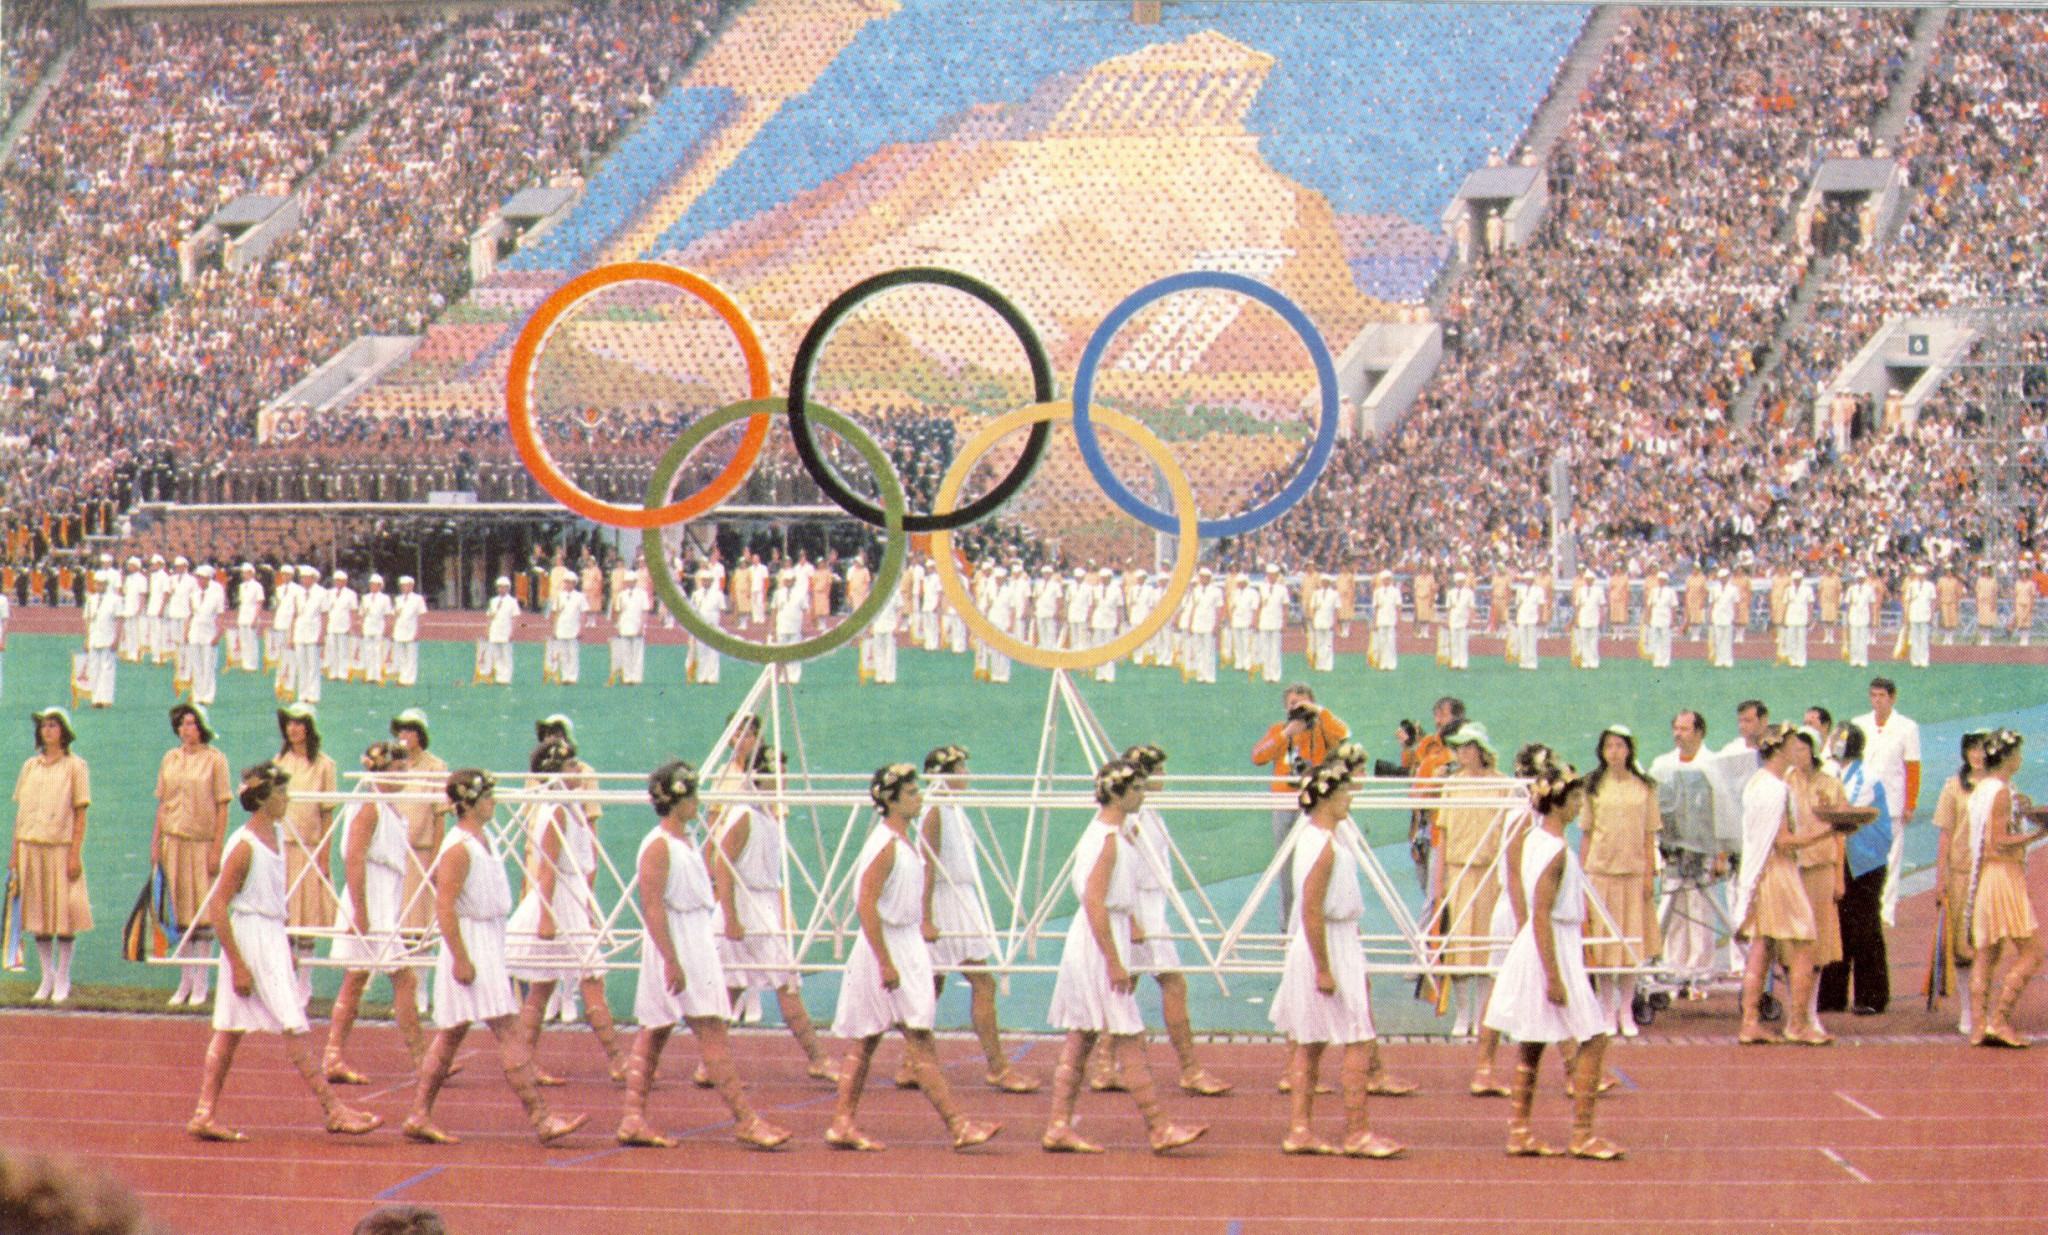 Philip Barker: Moscow 1980 was the best and most political Olympic ceremony